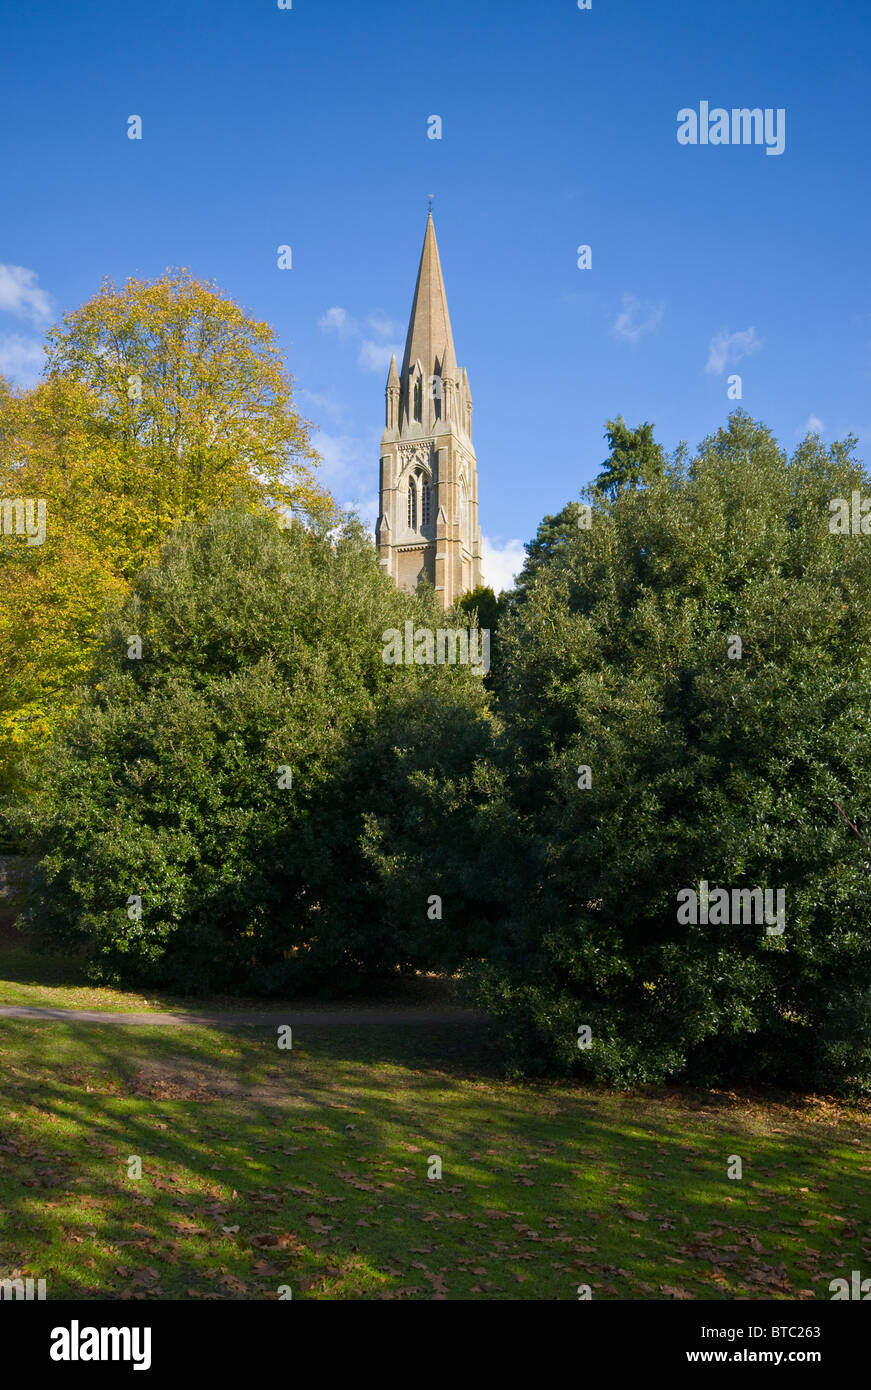 The Spire Of St John The Evangelist Church Redhill Above The Surrounding Trees Stock Photo